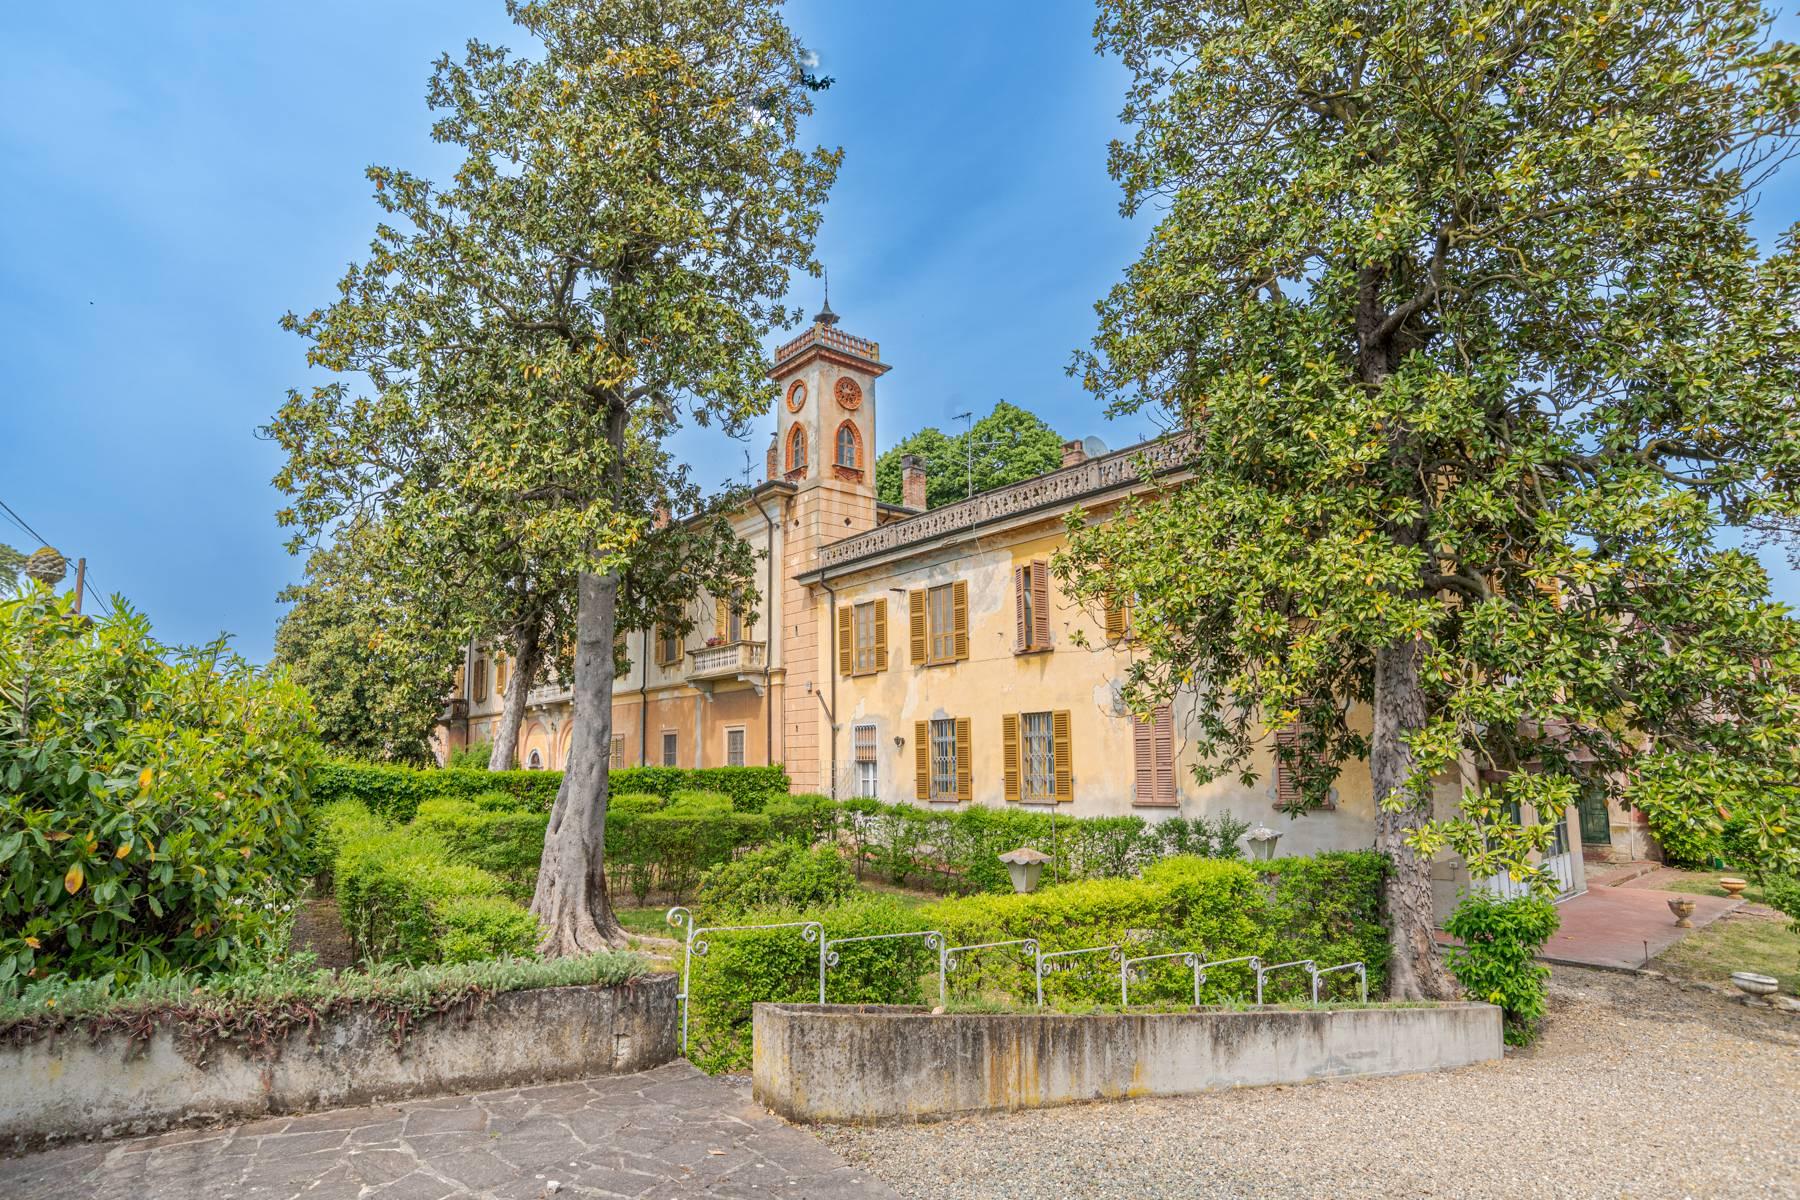 18th century villa with park in Oltrepo' Pavese - 1